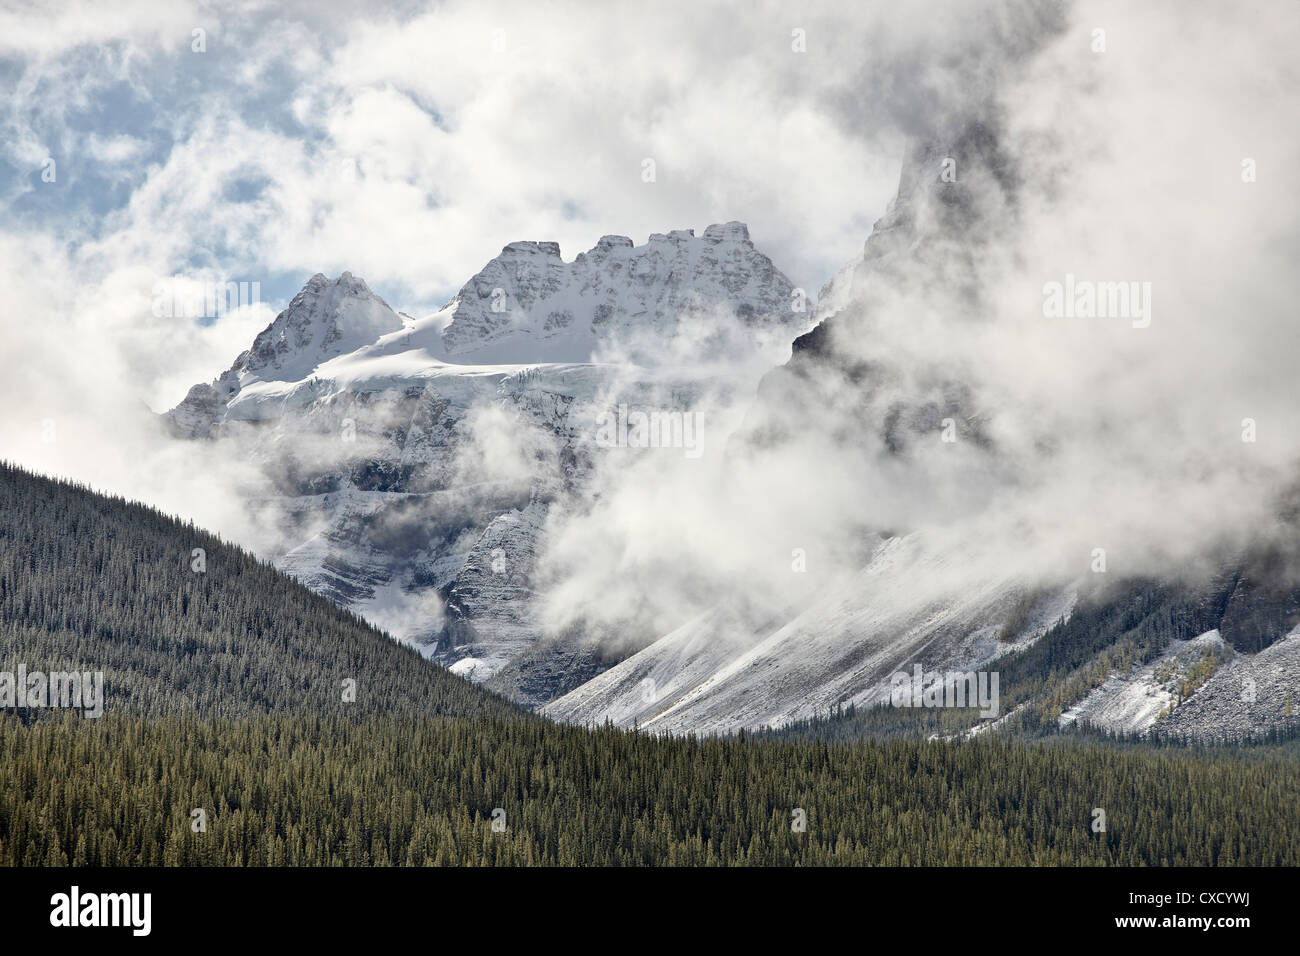 Snow-covered mountains among the clouds, Banff National Park, UNESCO World Heritage Site, Alberta, Canada, North America Stock Photo